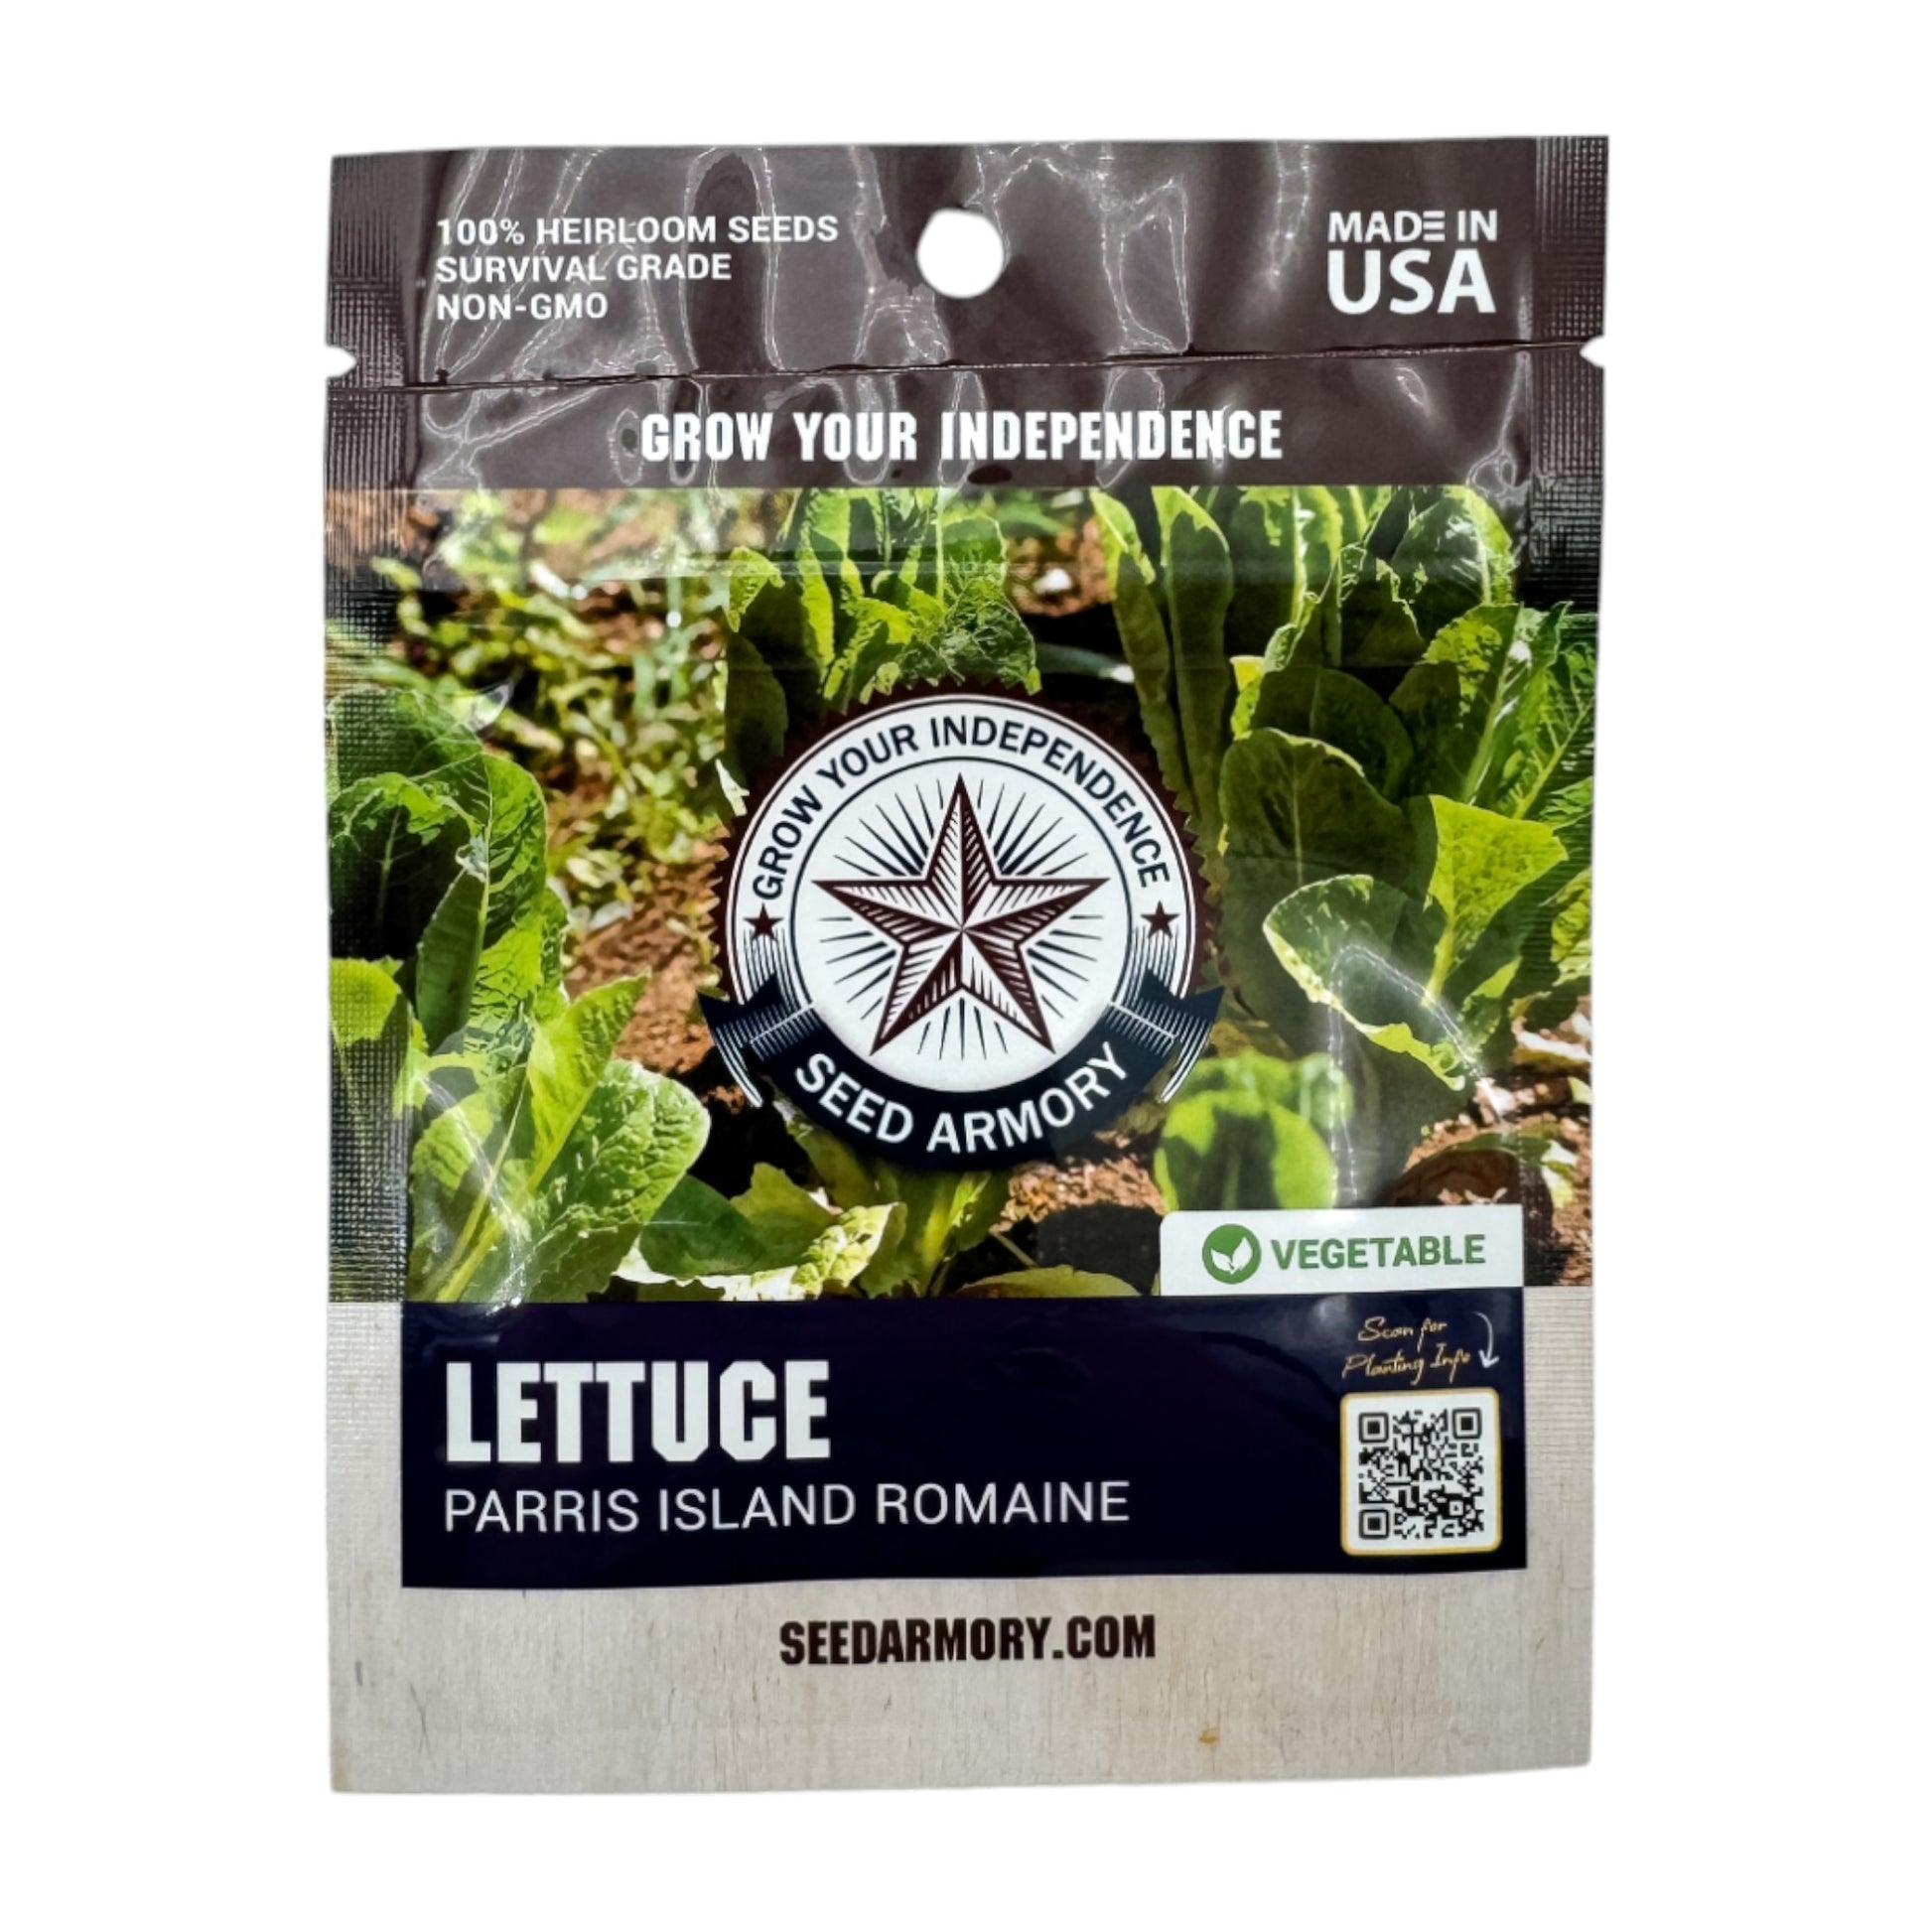 Front packet of Heirloom Parris Island Romaine lettuce seeds displayed on a white background